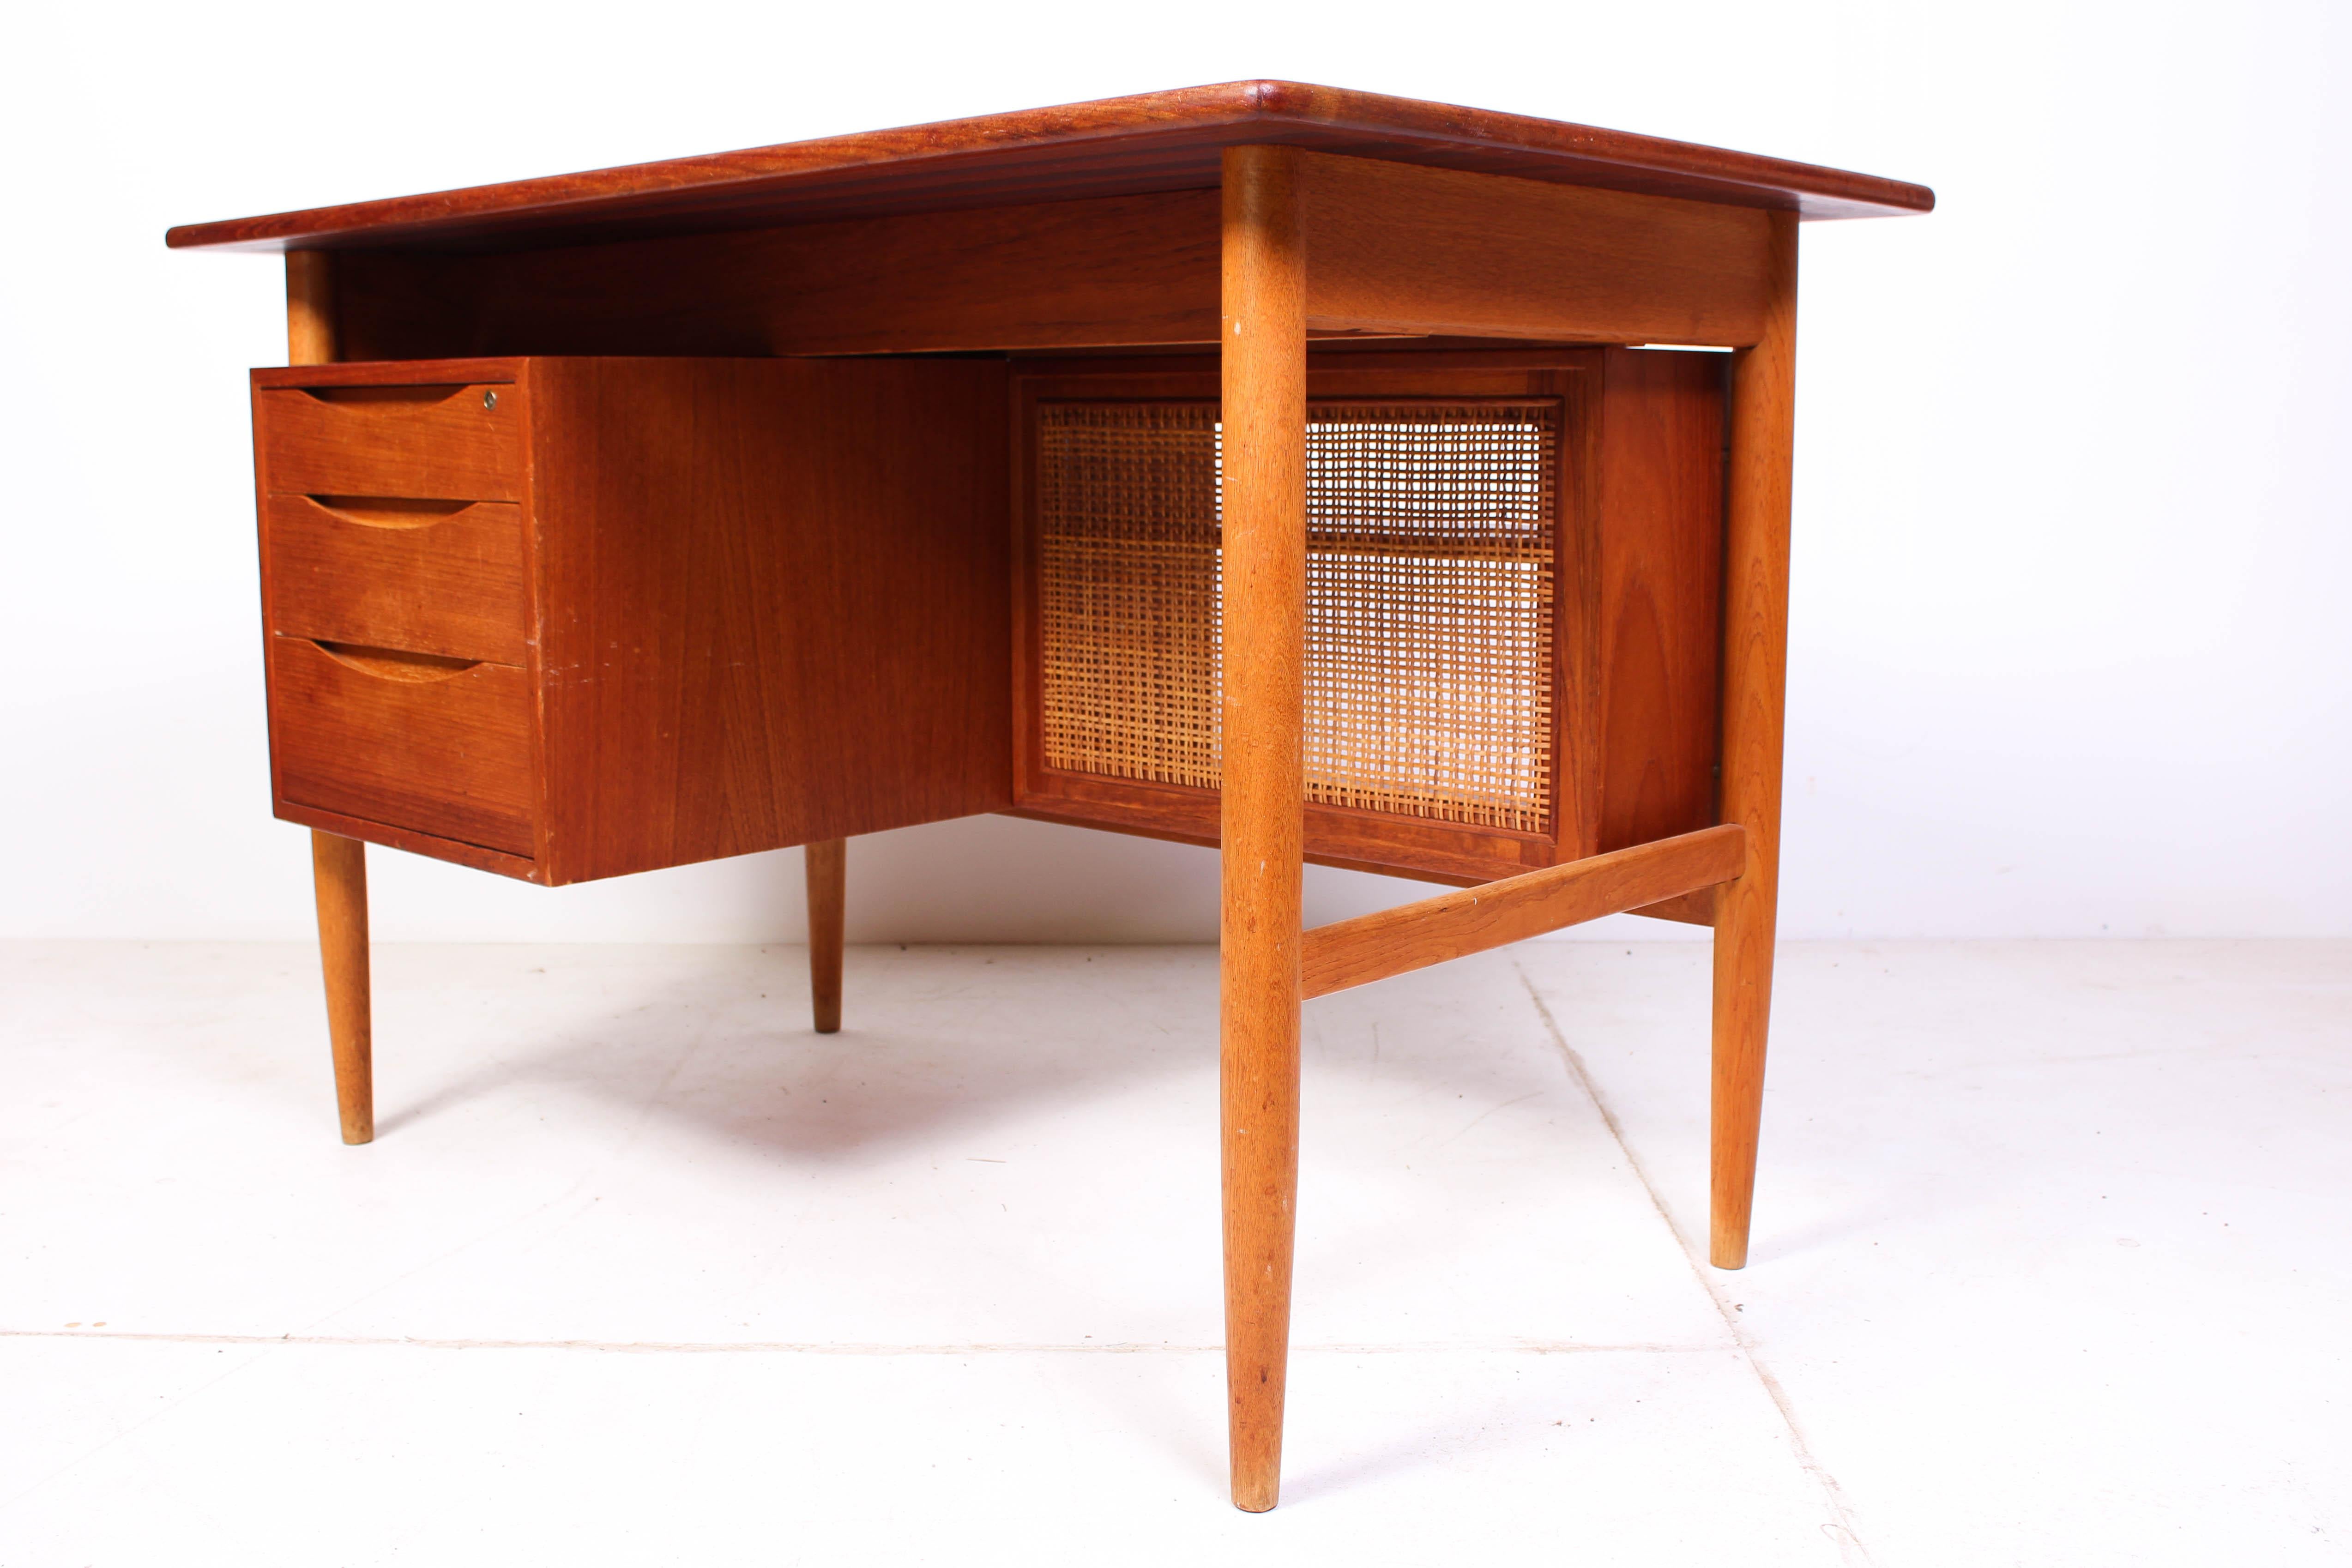 A midcentury Scandinavian Modern teak desk by unknown Scandinavian designer. The desk is made out of teak with oak legs and a cane shelf. It is a very decorative desk. It is in good vintage condition with signs of usage consistent with age. There